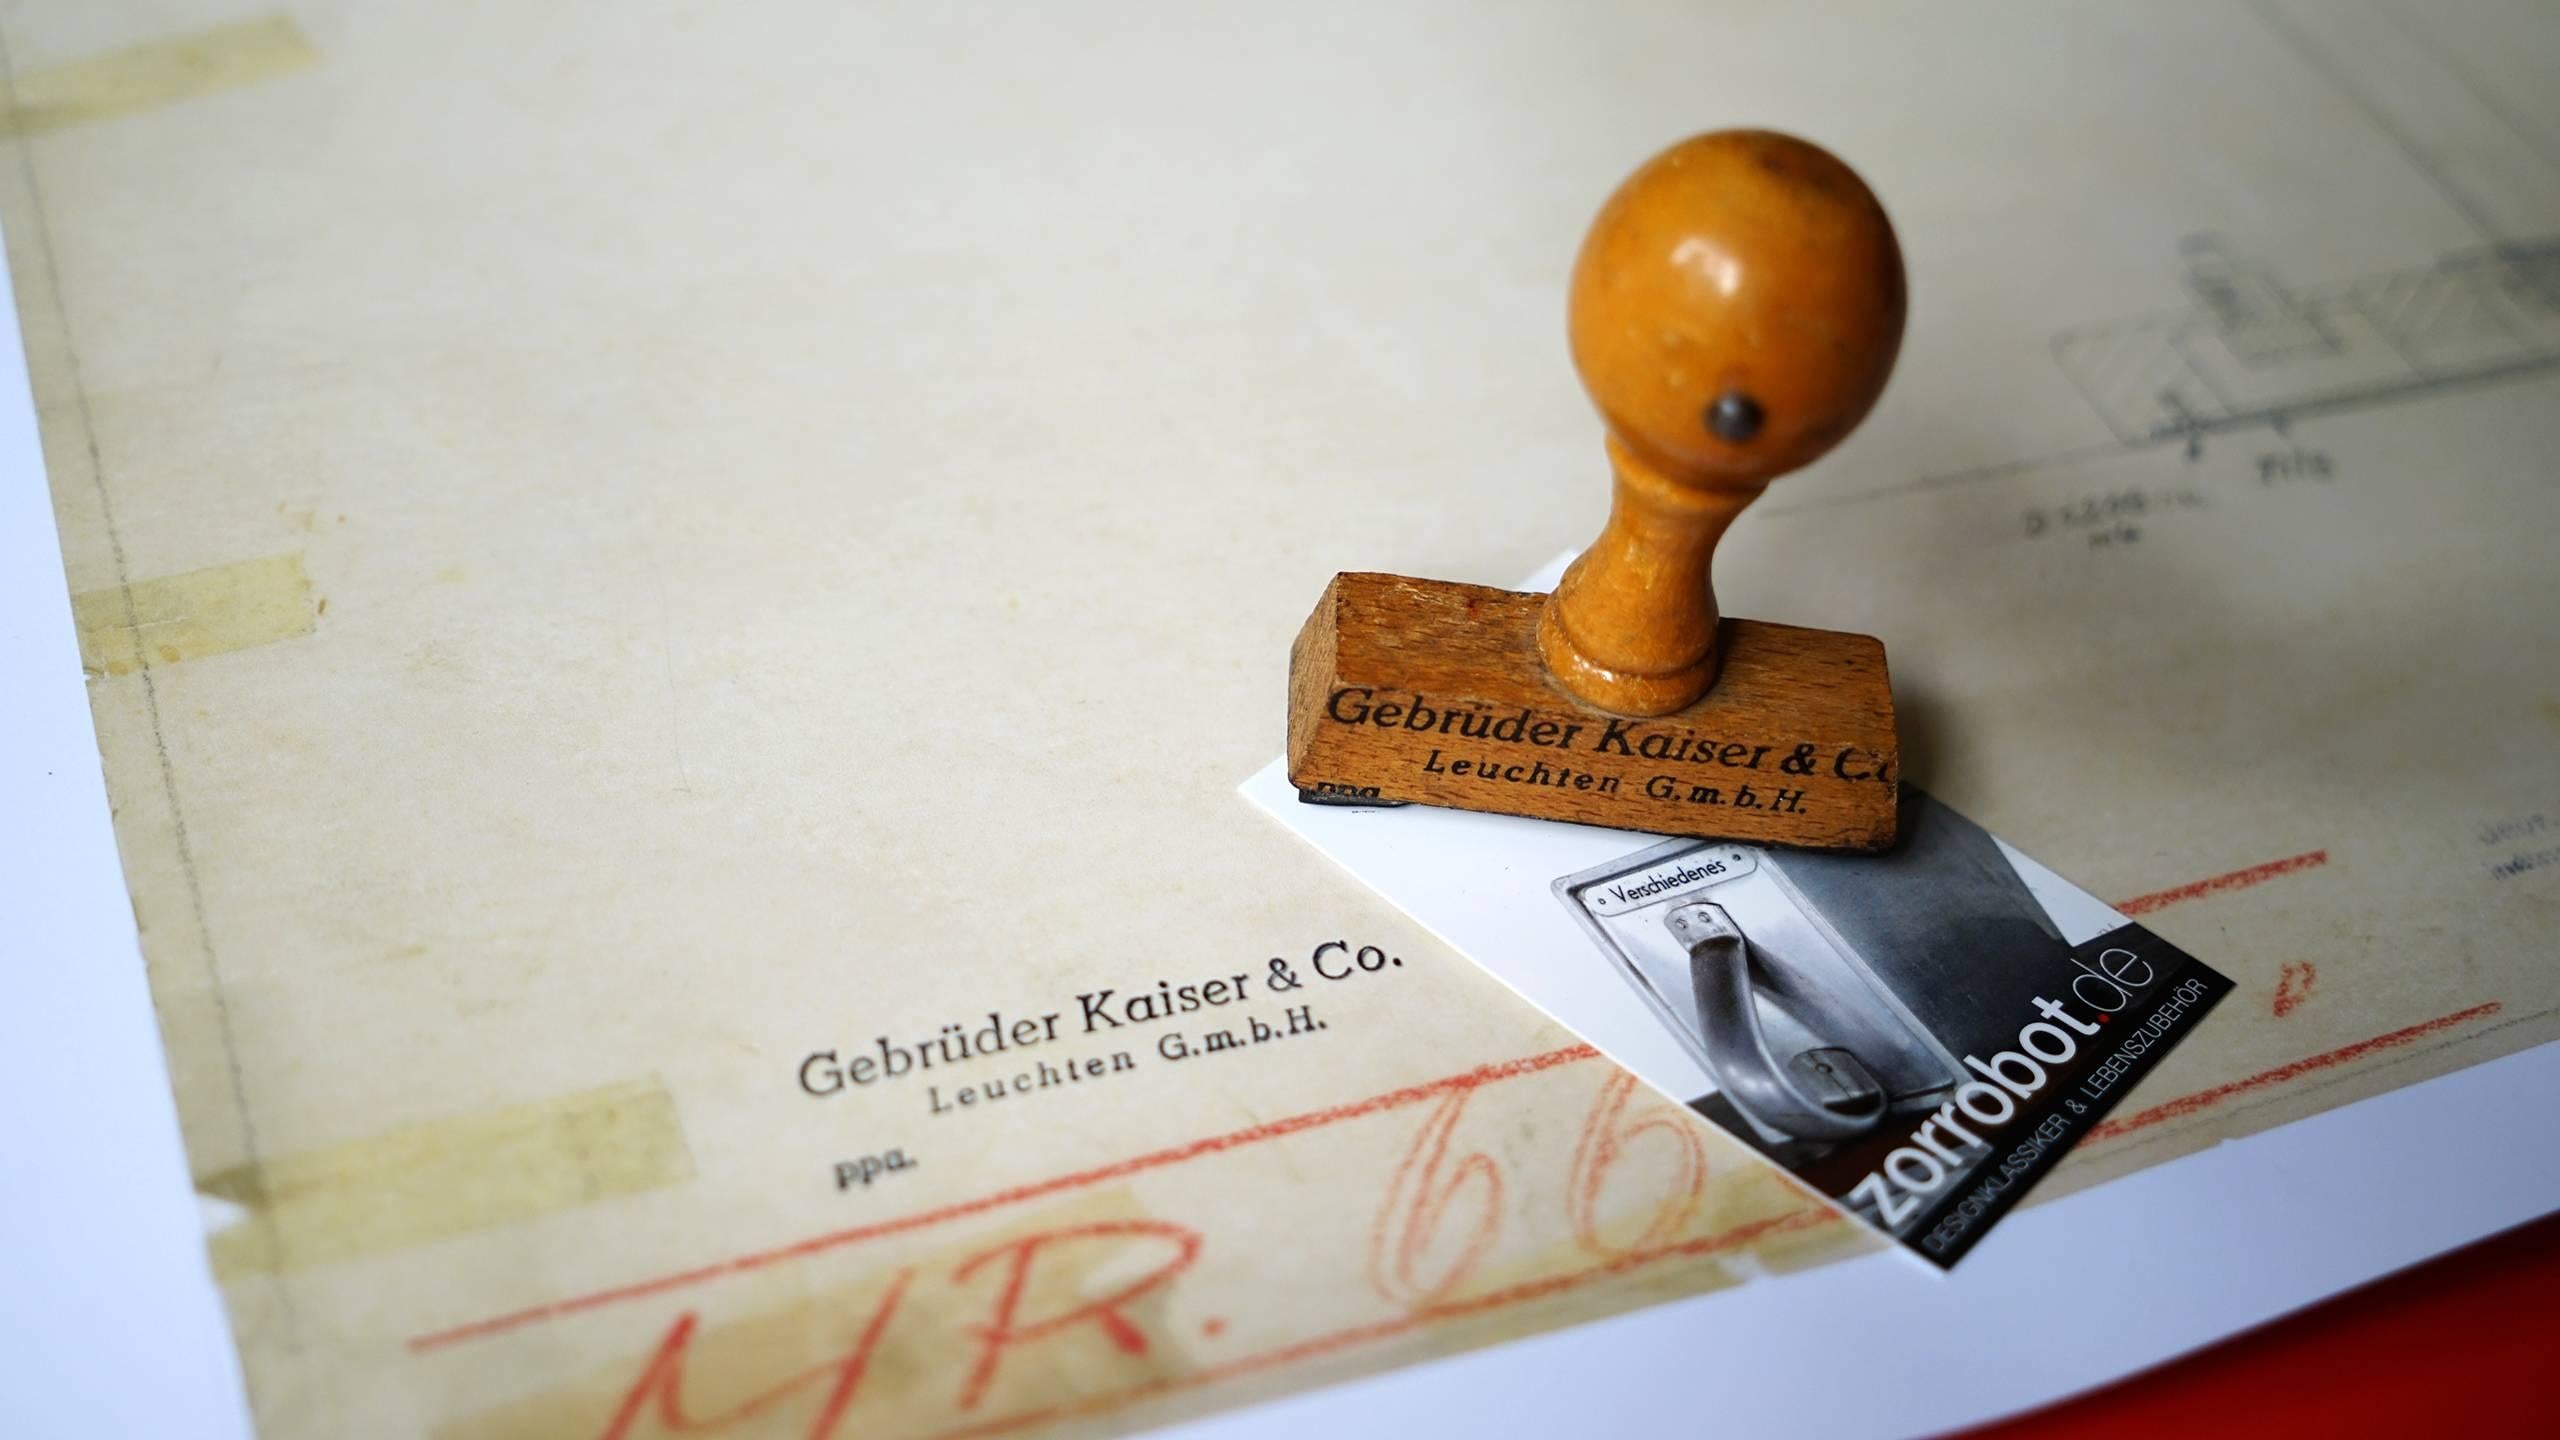 High quality print of the original Christian Dell drawing for Kaiser Idell and its famous Bauhaus lamp.

598mm x 455mm, stamped with original Kaiser Idell 